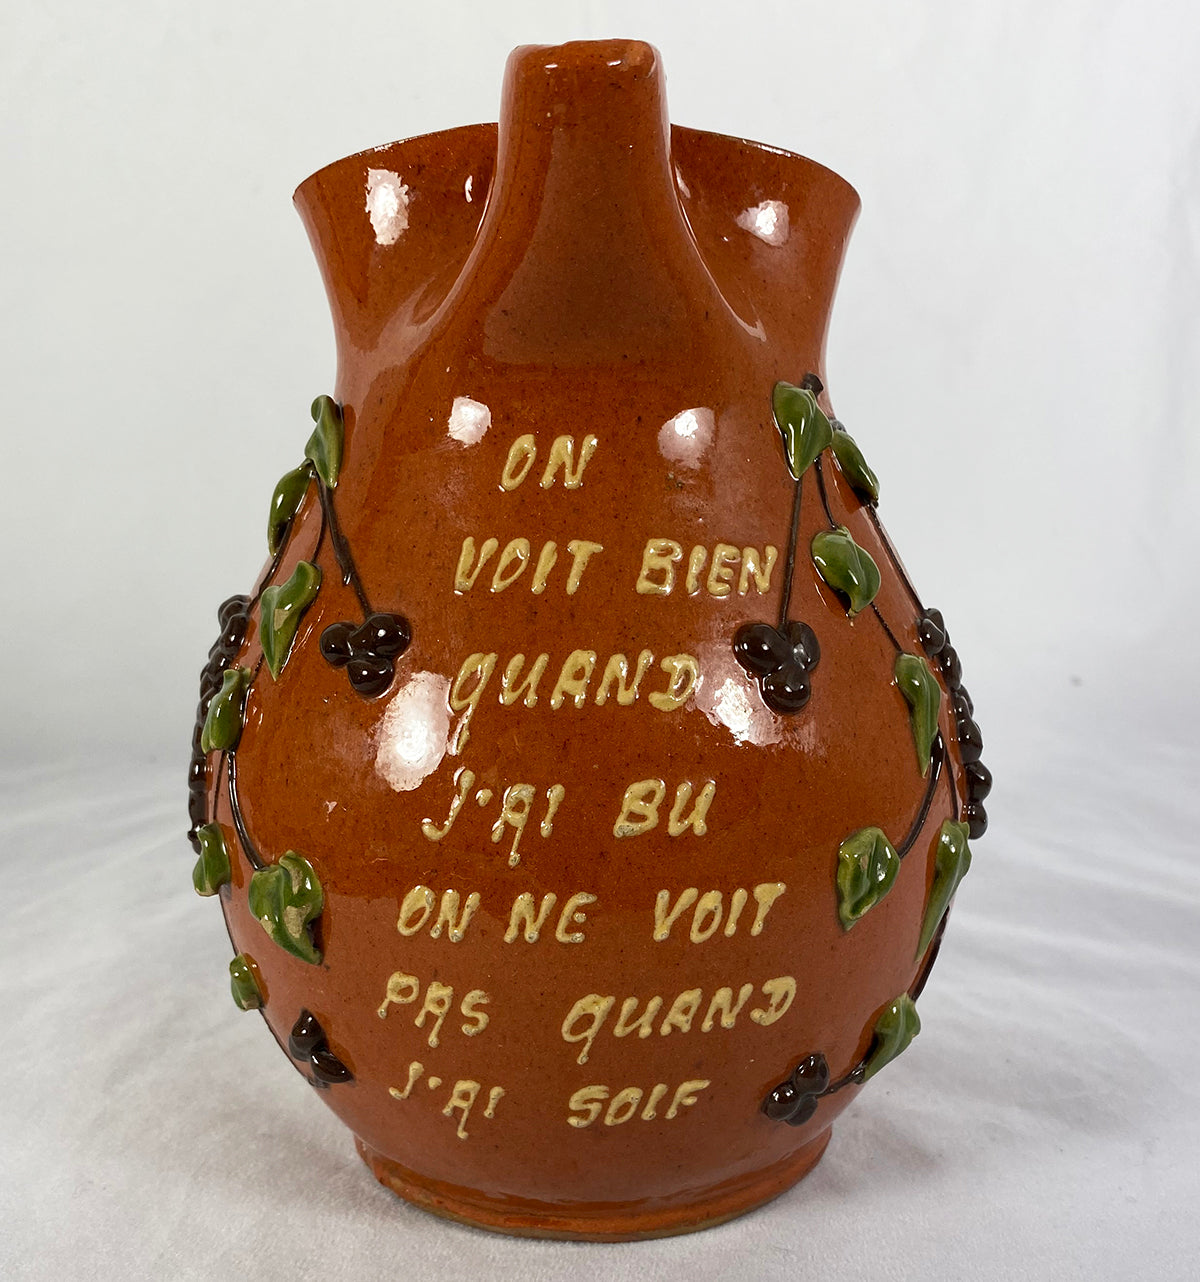 Antique French Savoie Pottery  "Pichet Parlant" Talking Pitcher, Cafe or Wine in Galzed Pottery